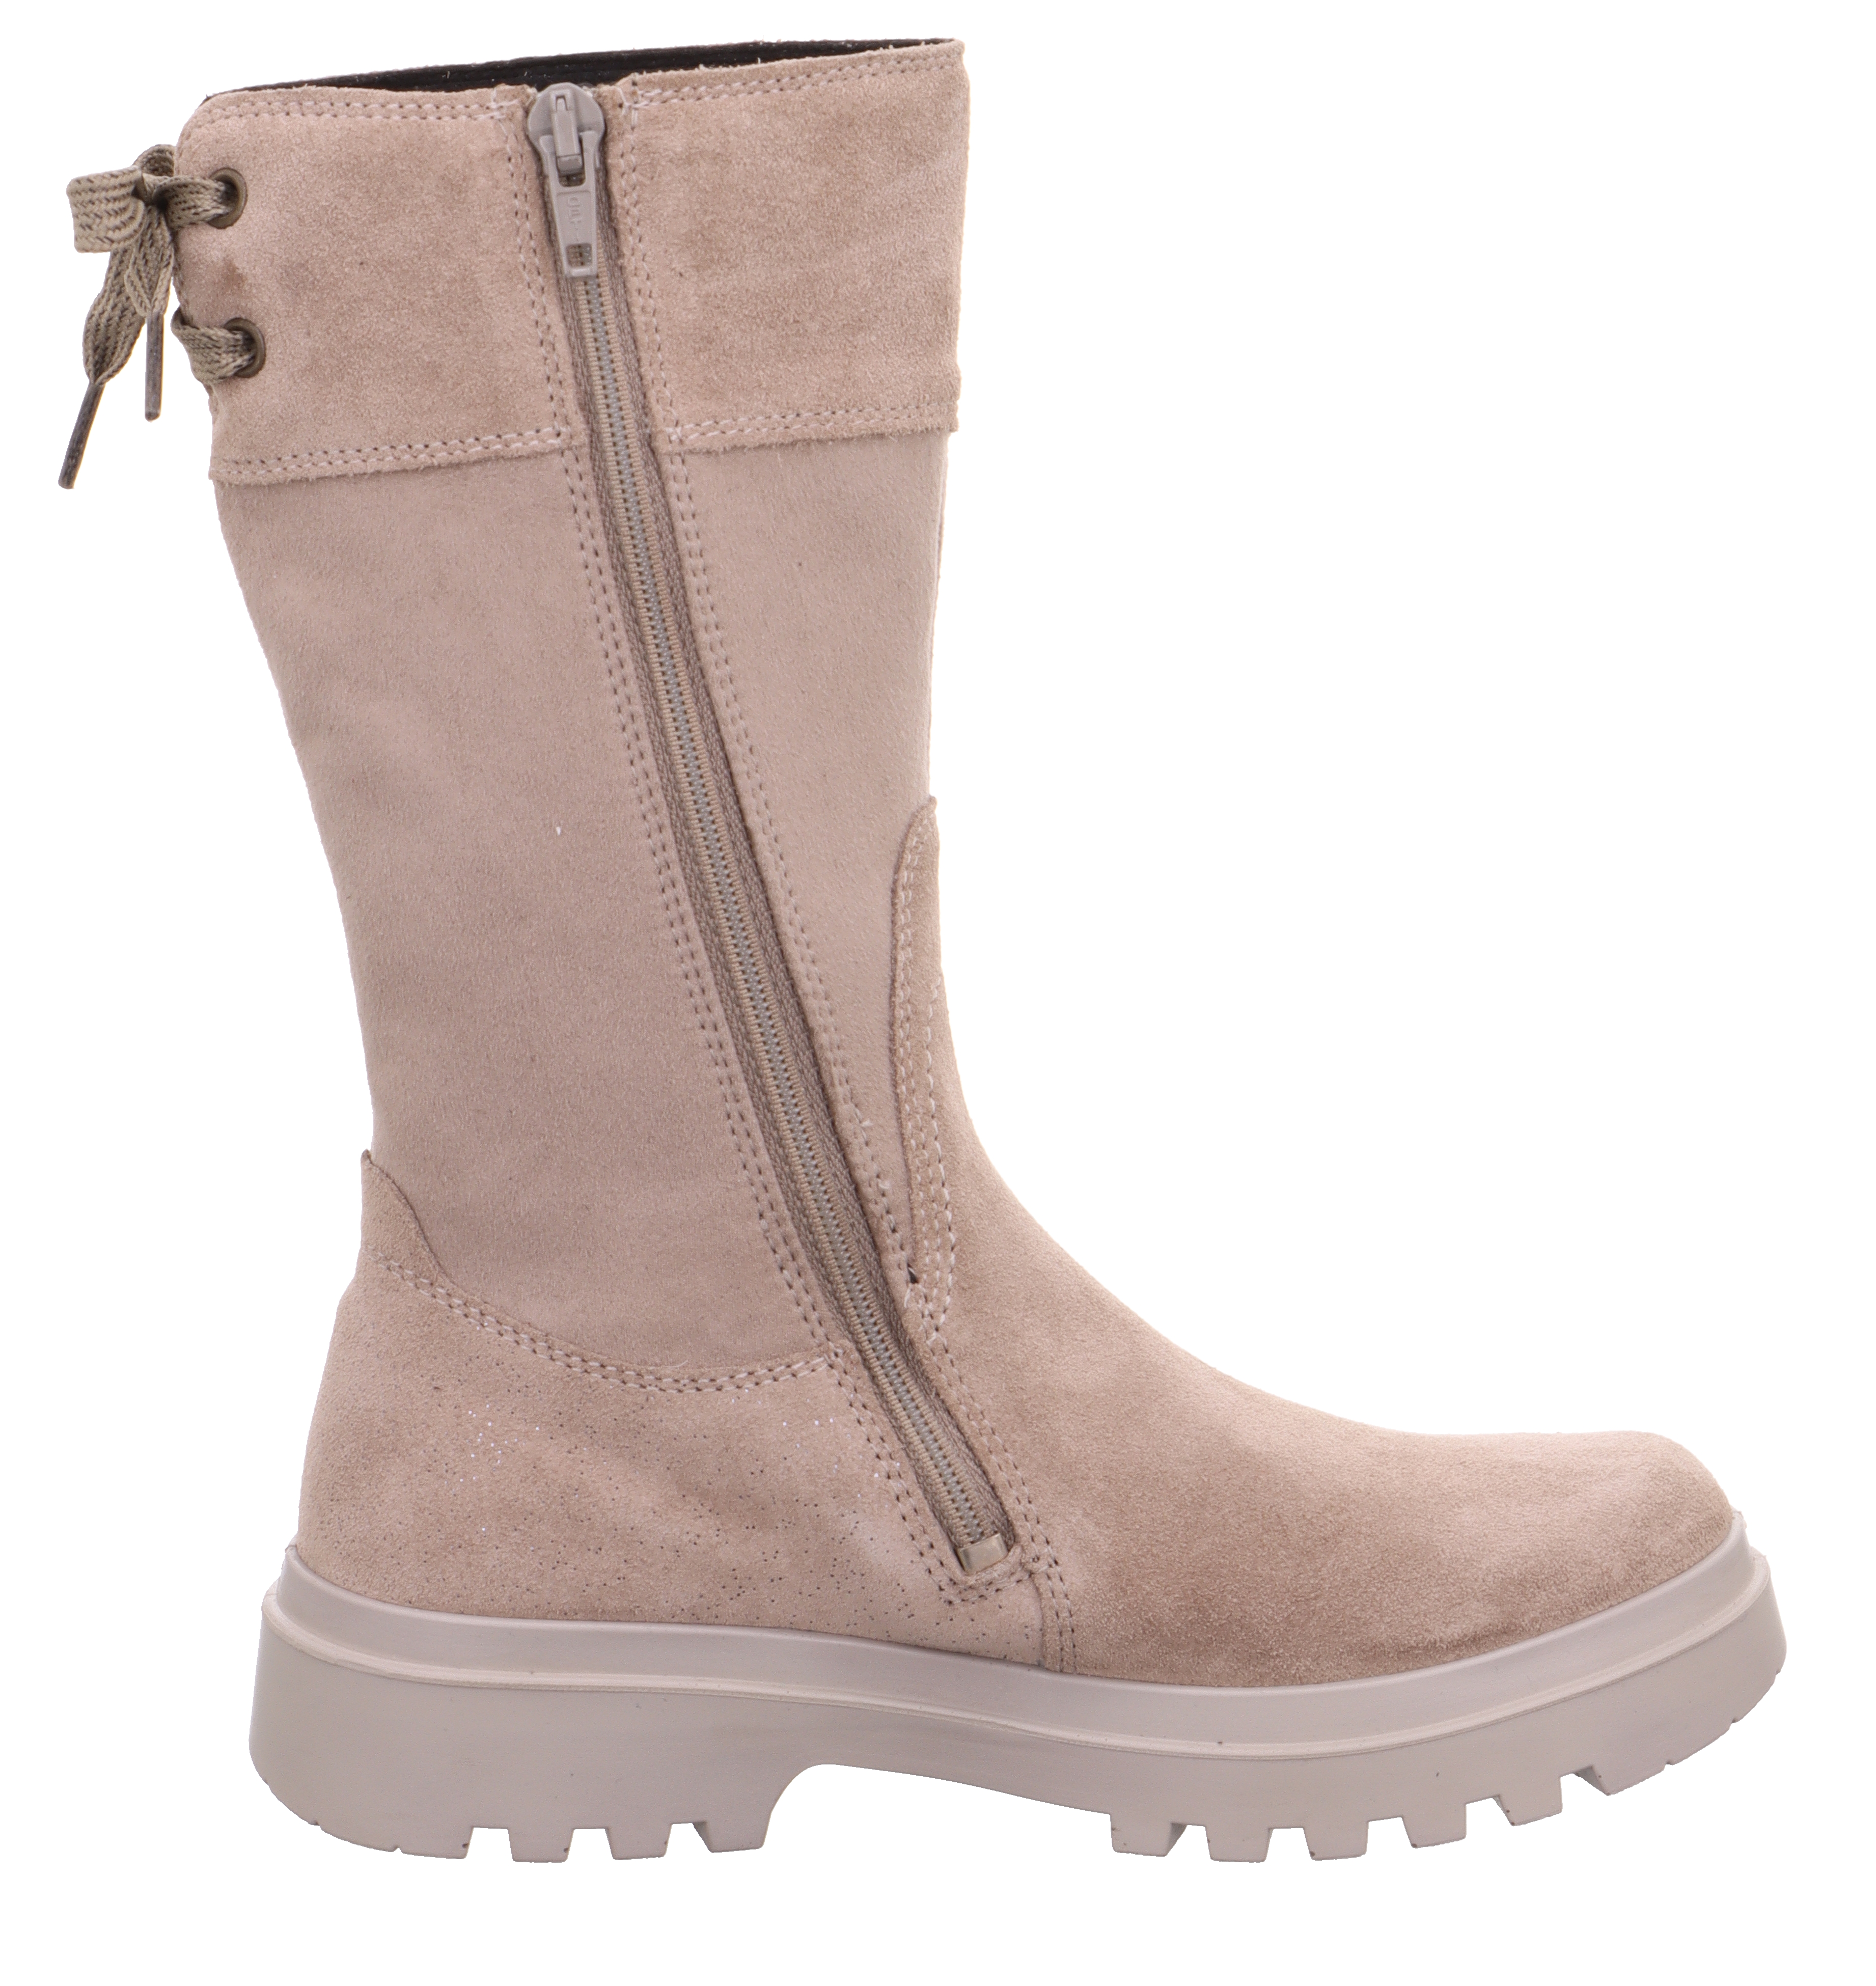 Superfit Abby - Beige suede leather